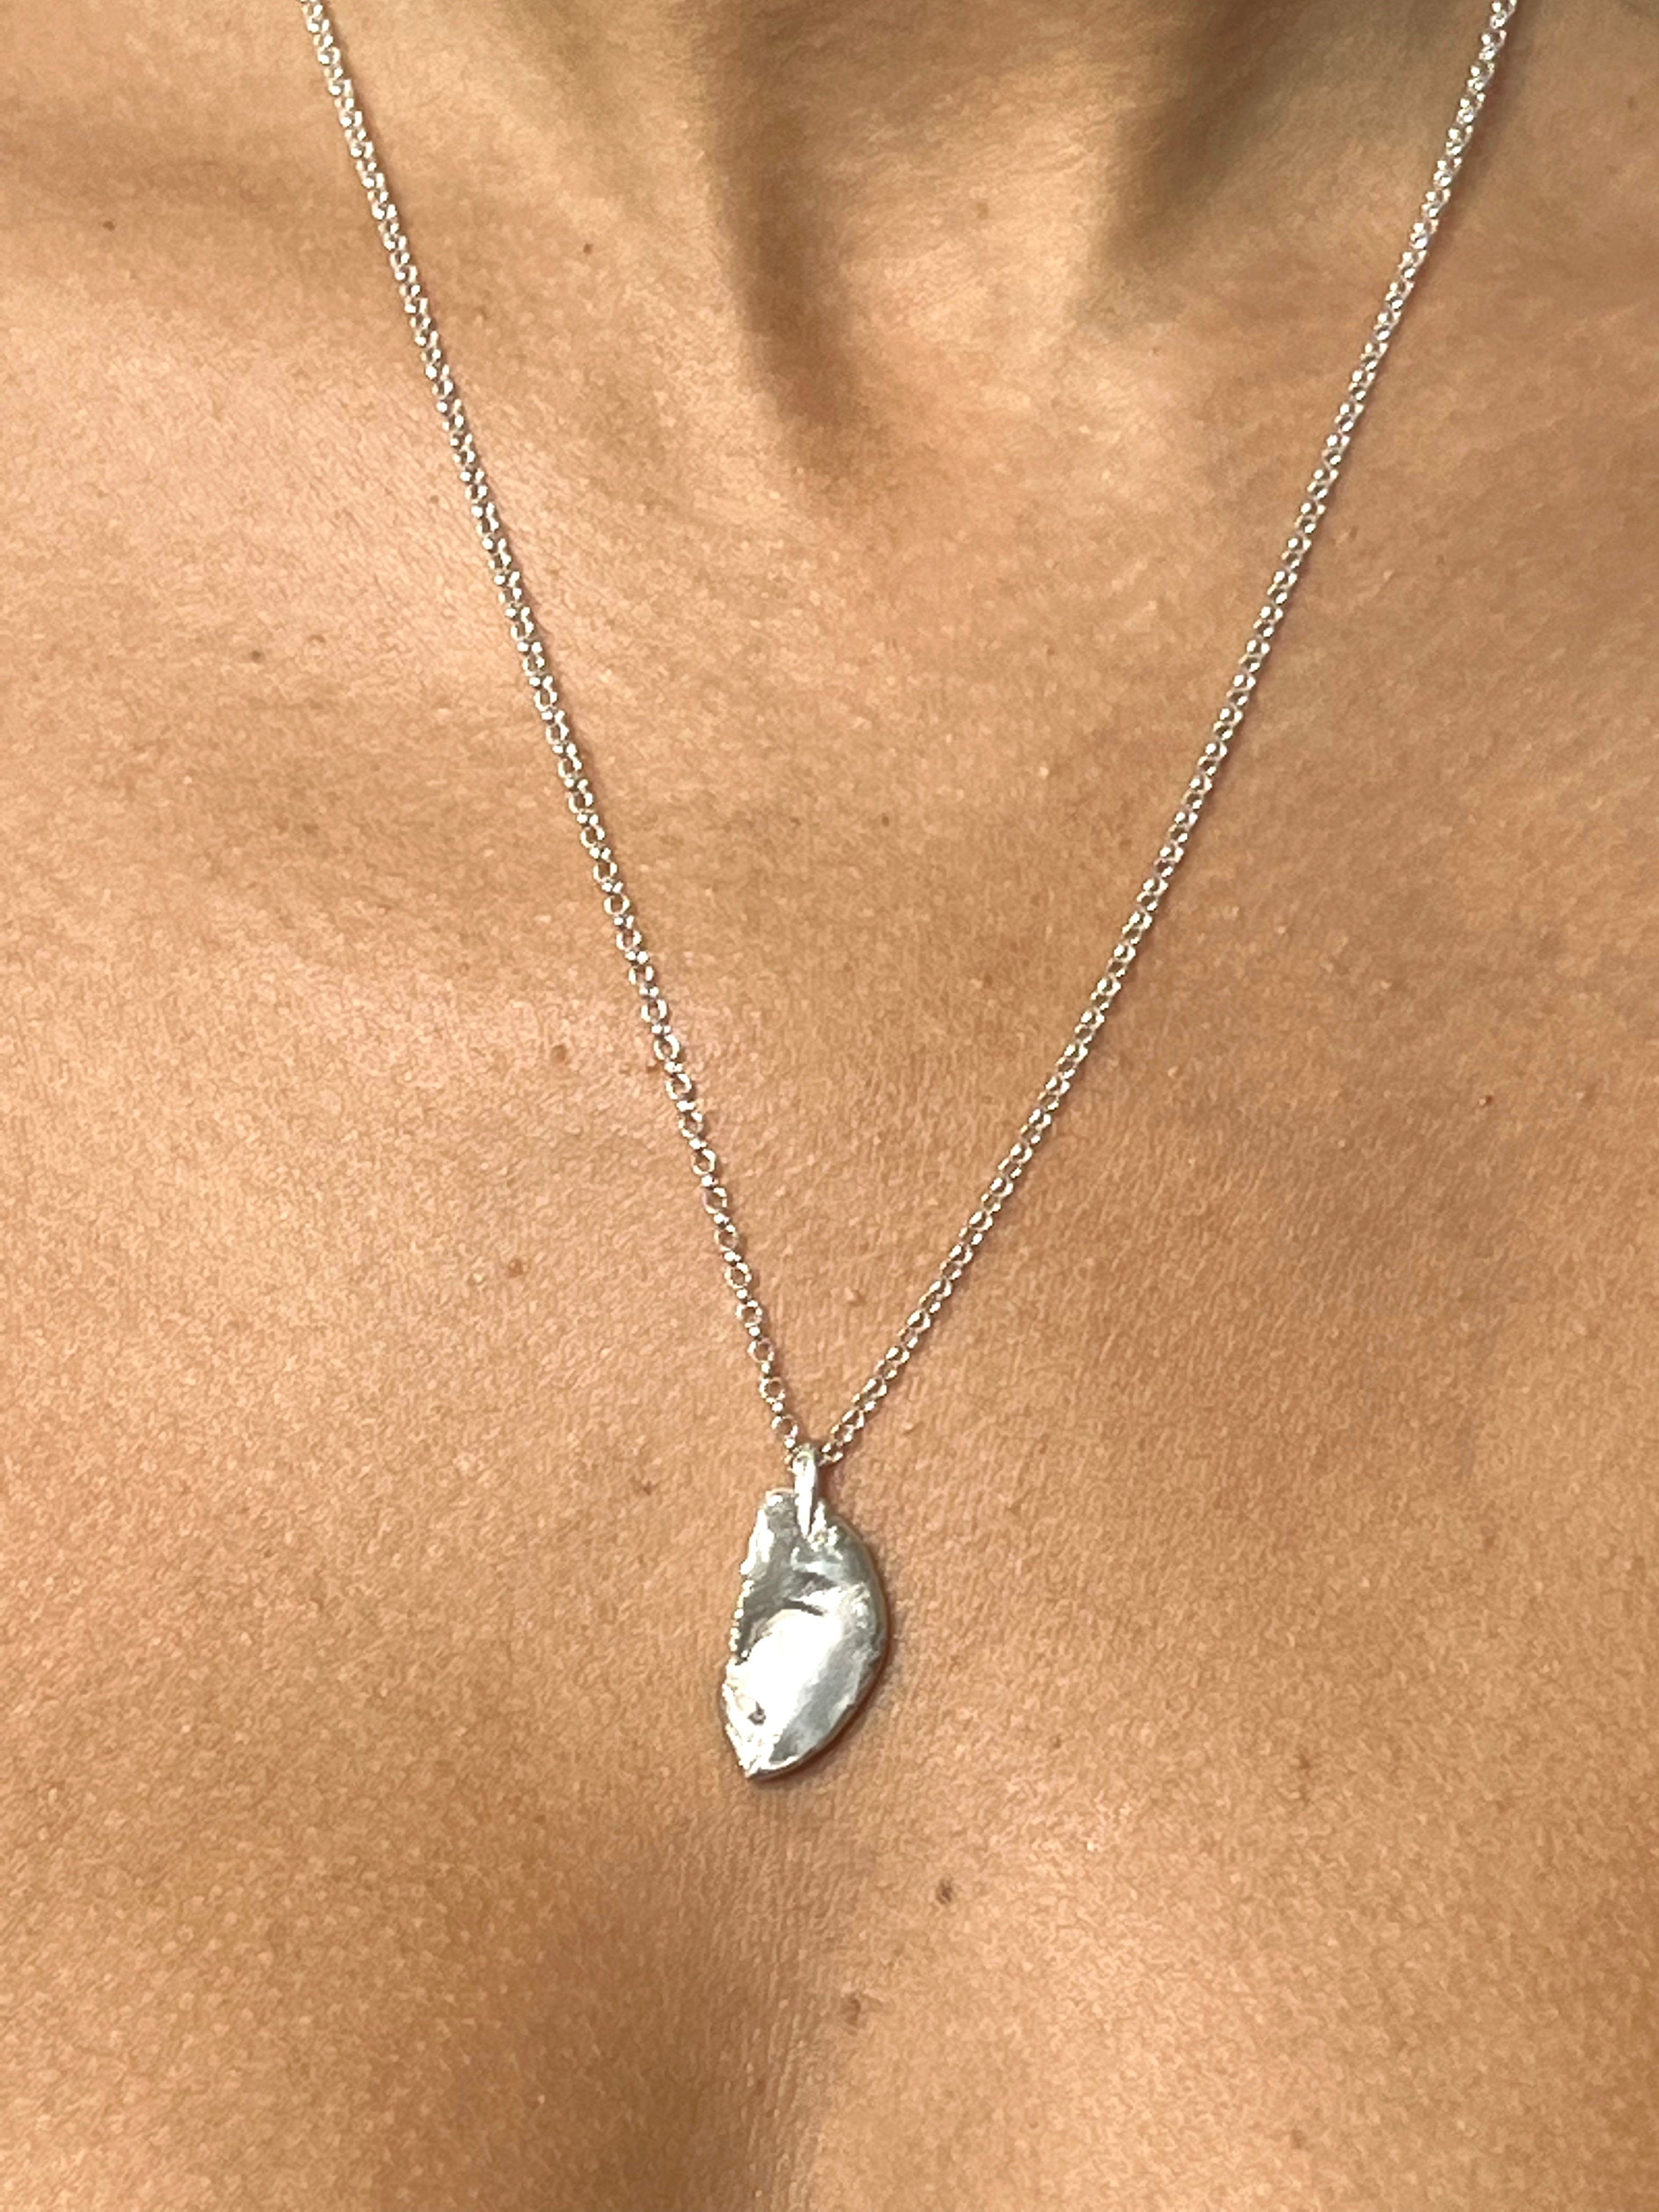 INSIEME Necklace (pair) - sterling silver